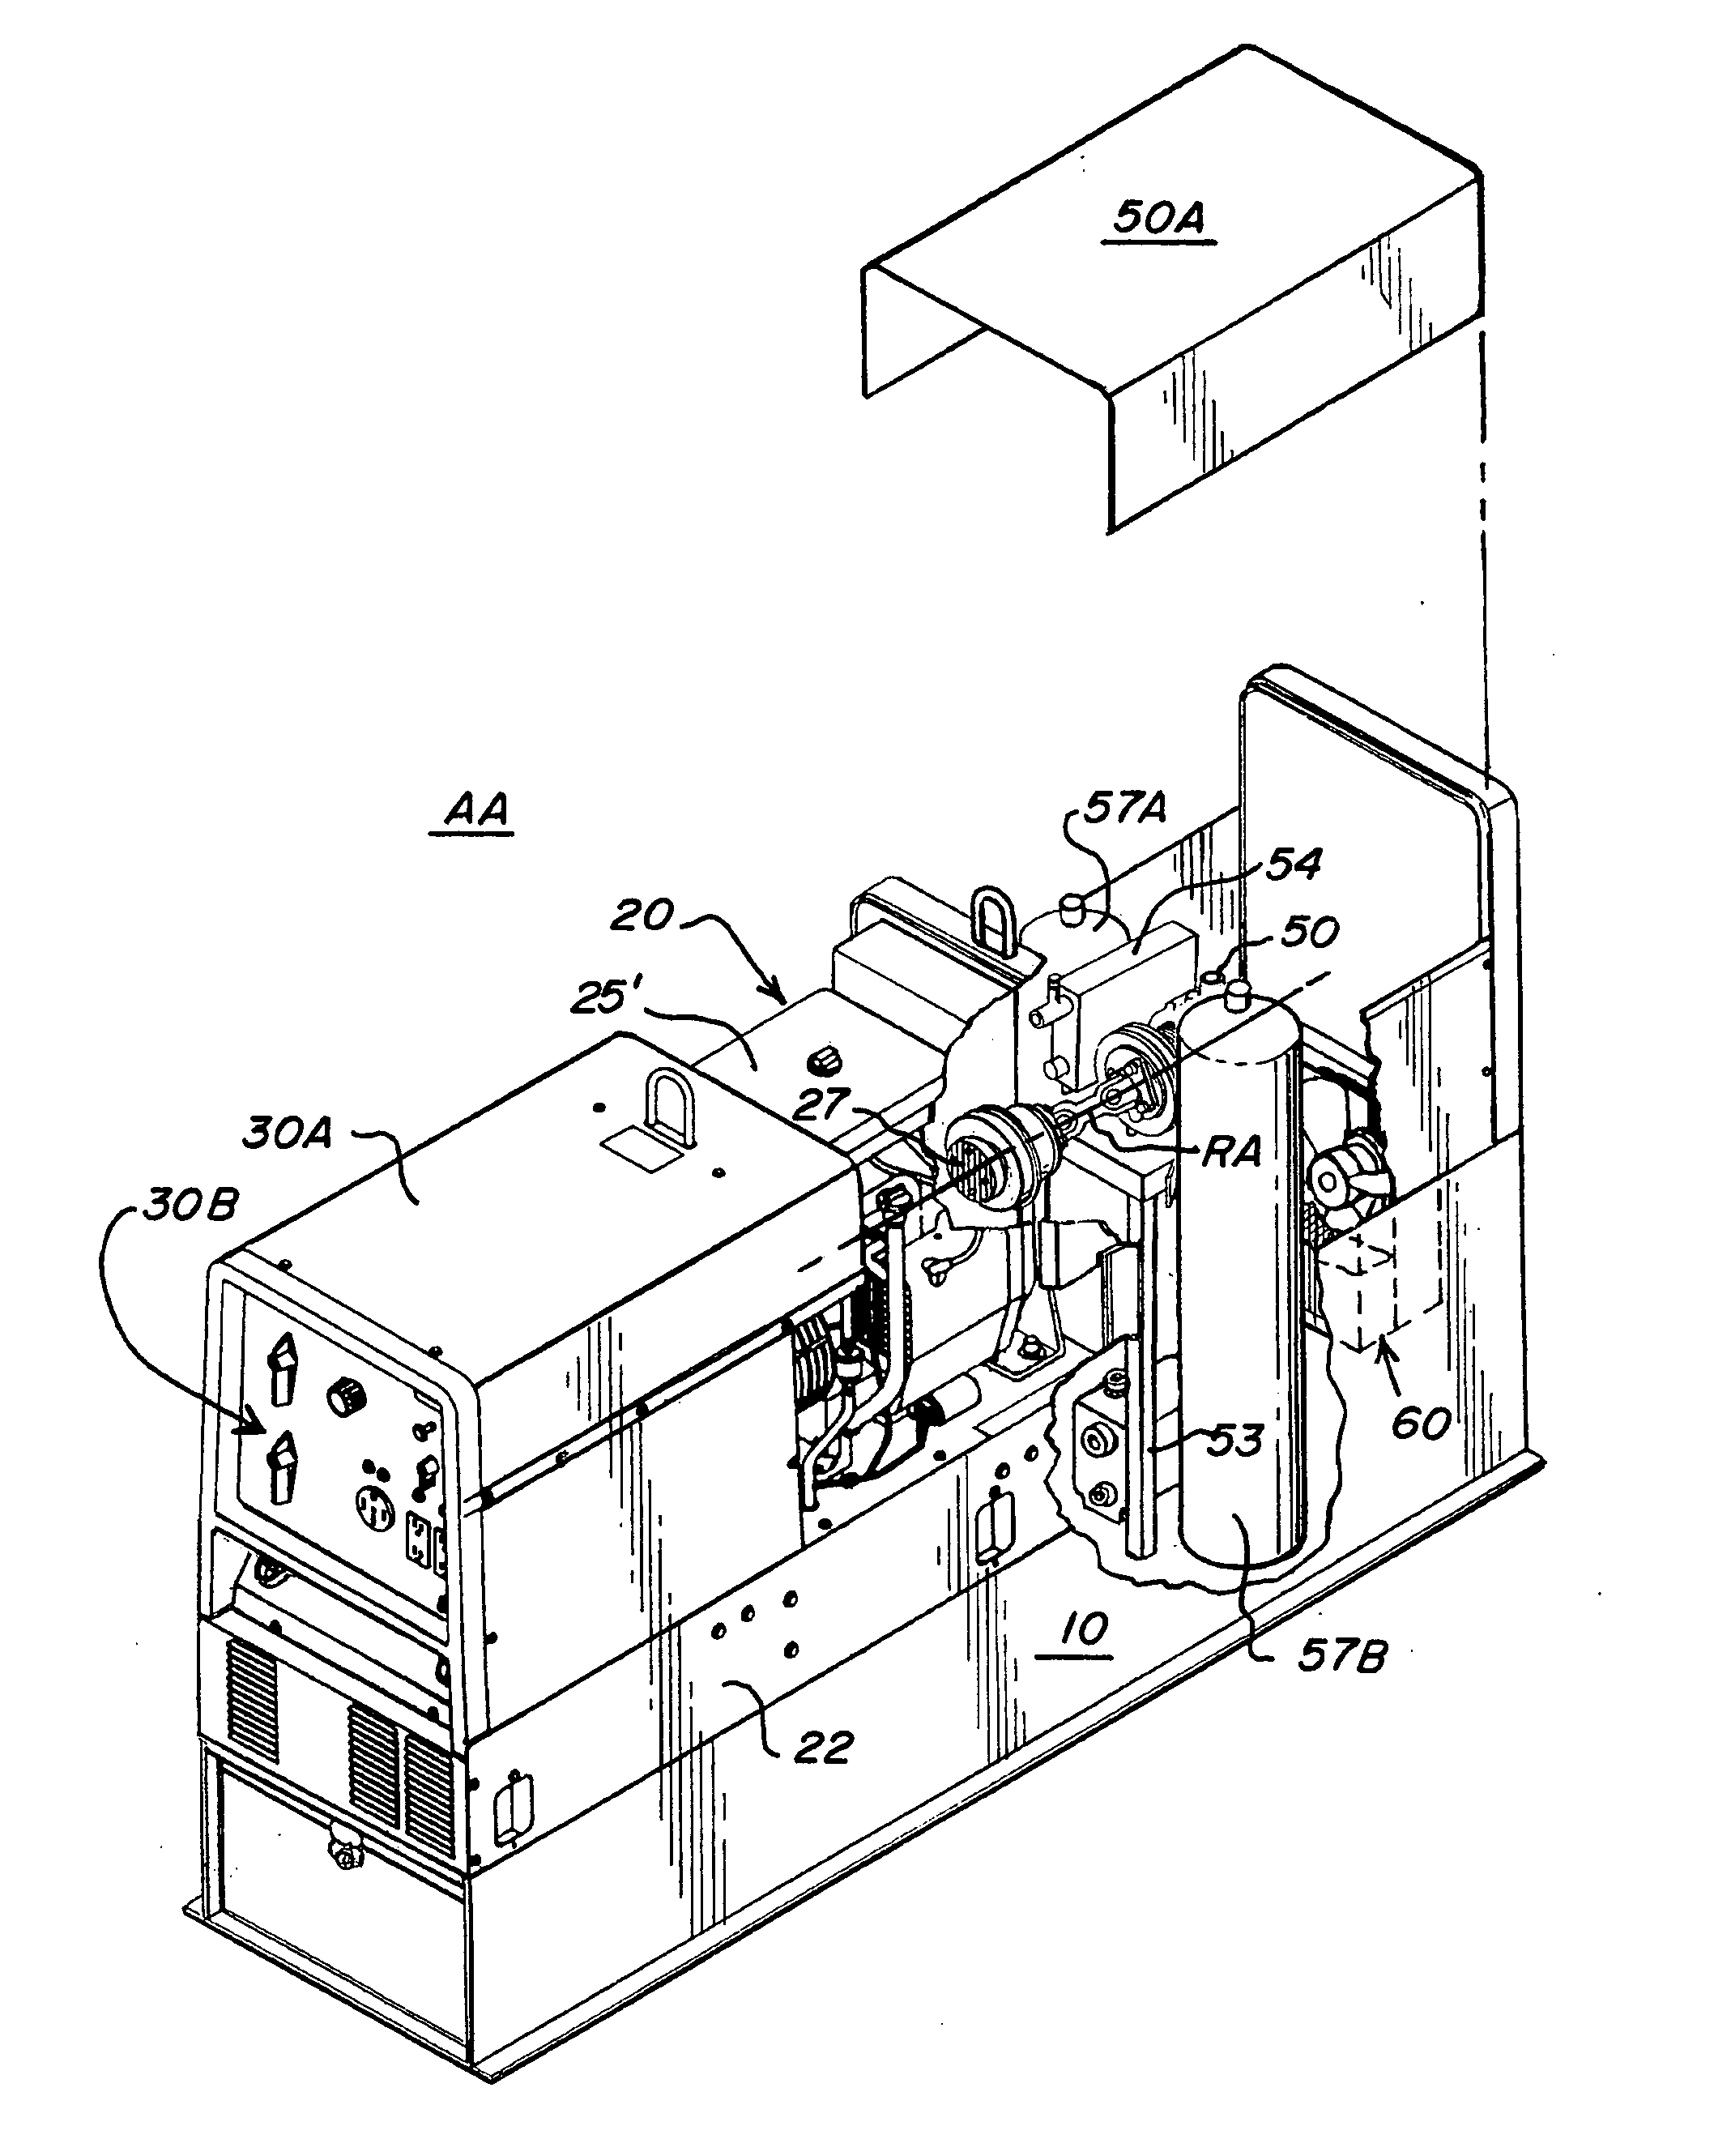 Multi-function integrated portable power and utility apparatus